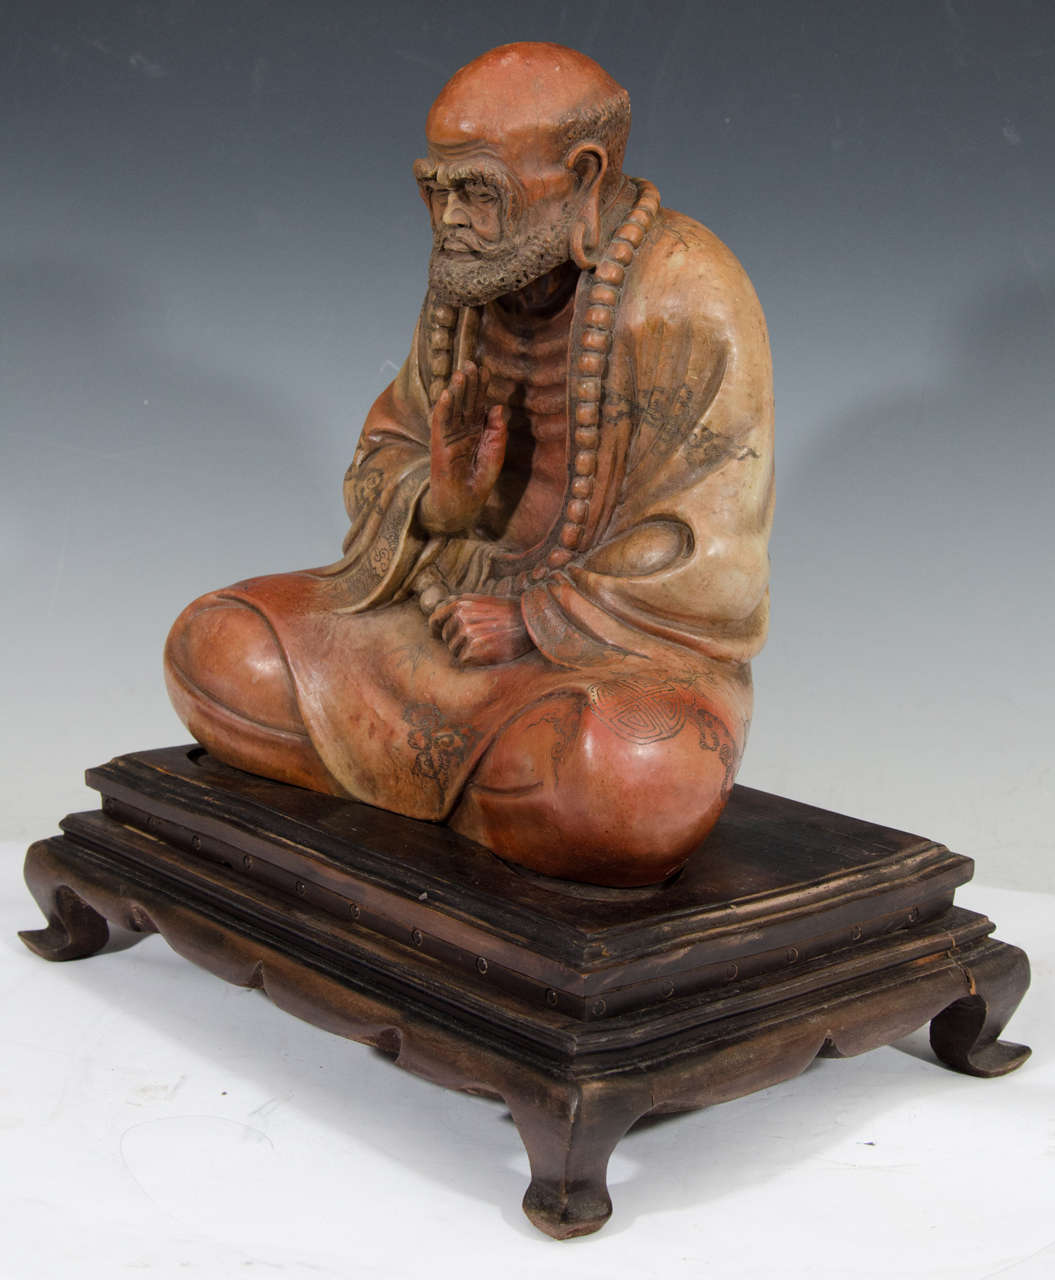 A Chinese soapstone carving depicting the Luohan in an elaborate robe seated and meditating, or praying. Carving rests on a wooden base.